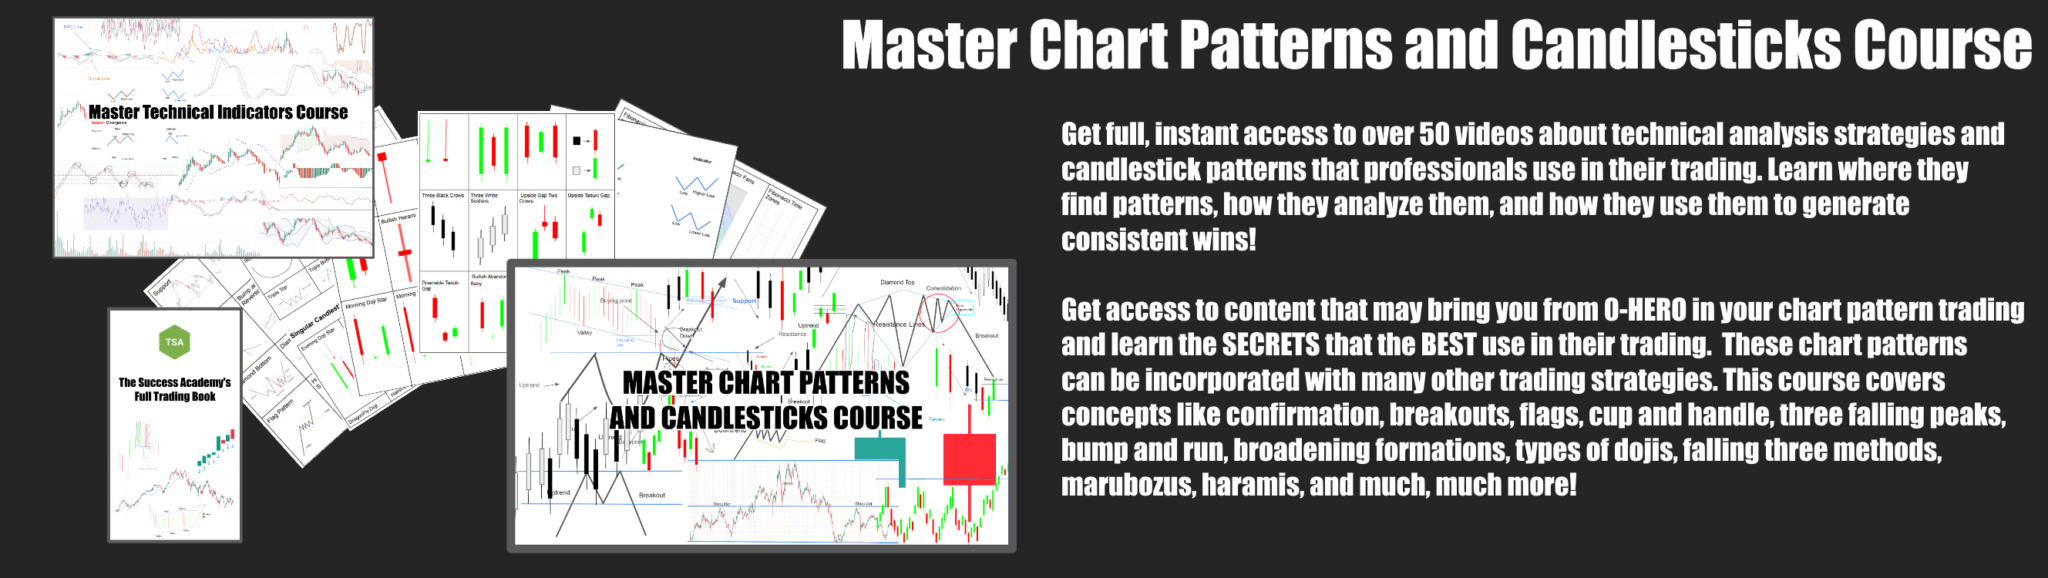 Master Chart Patterns and Candlesticks Course Summary with a description